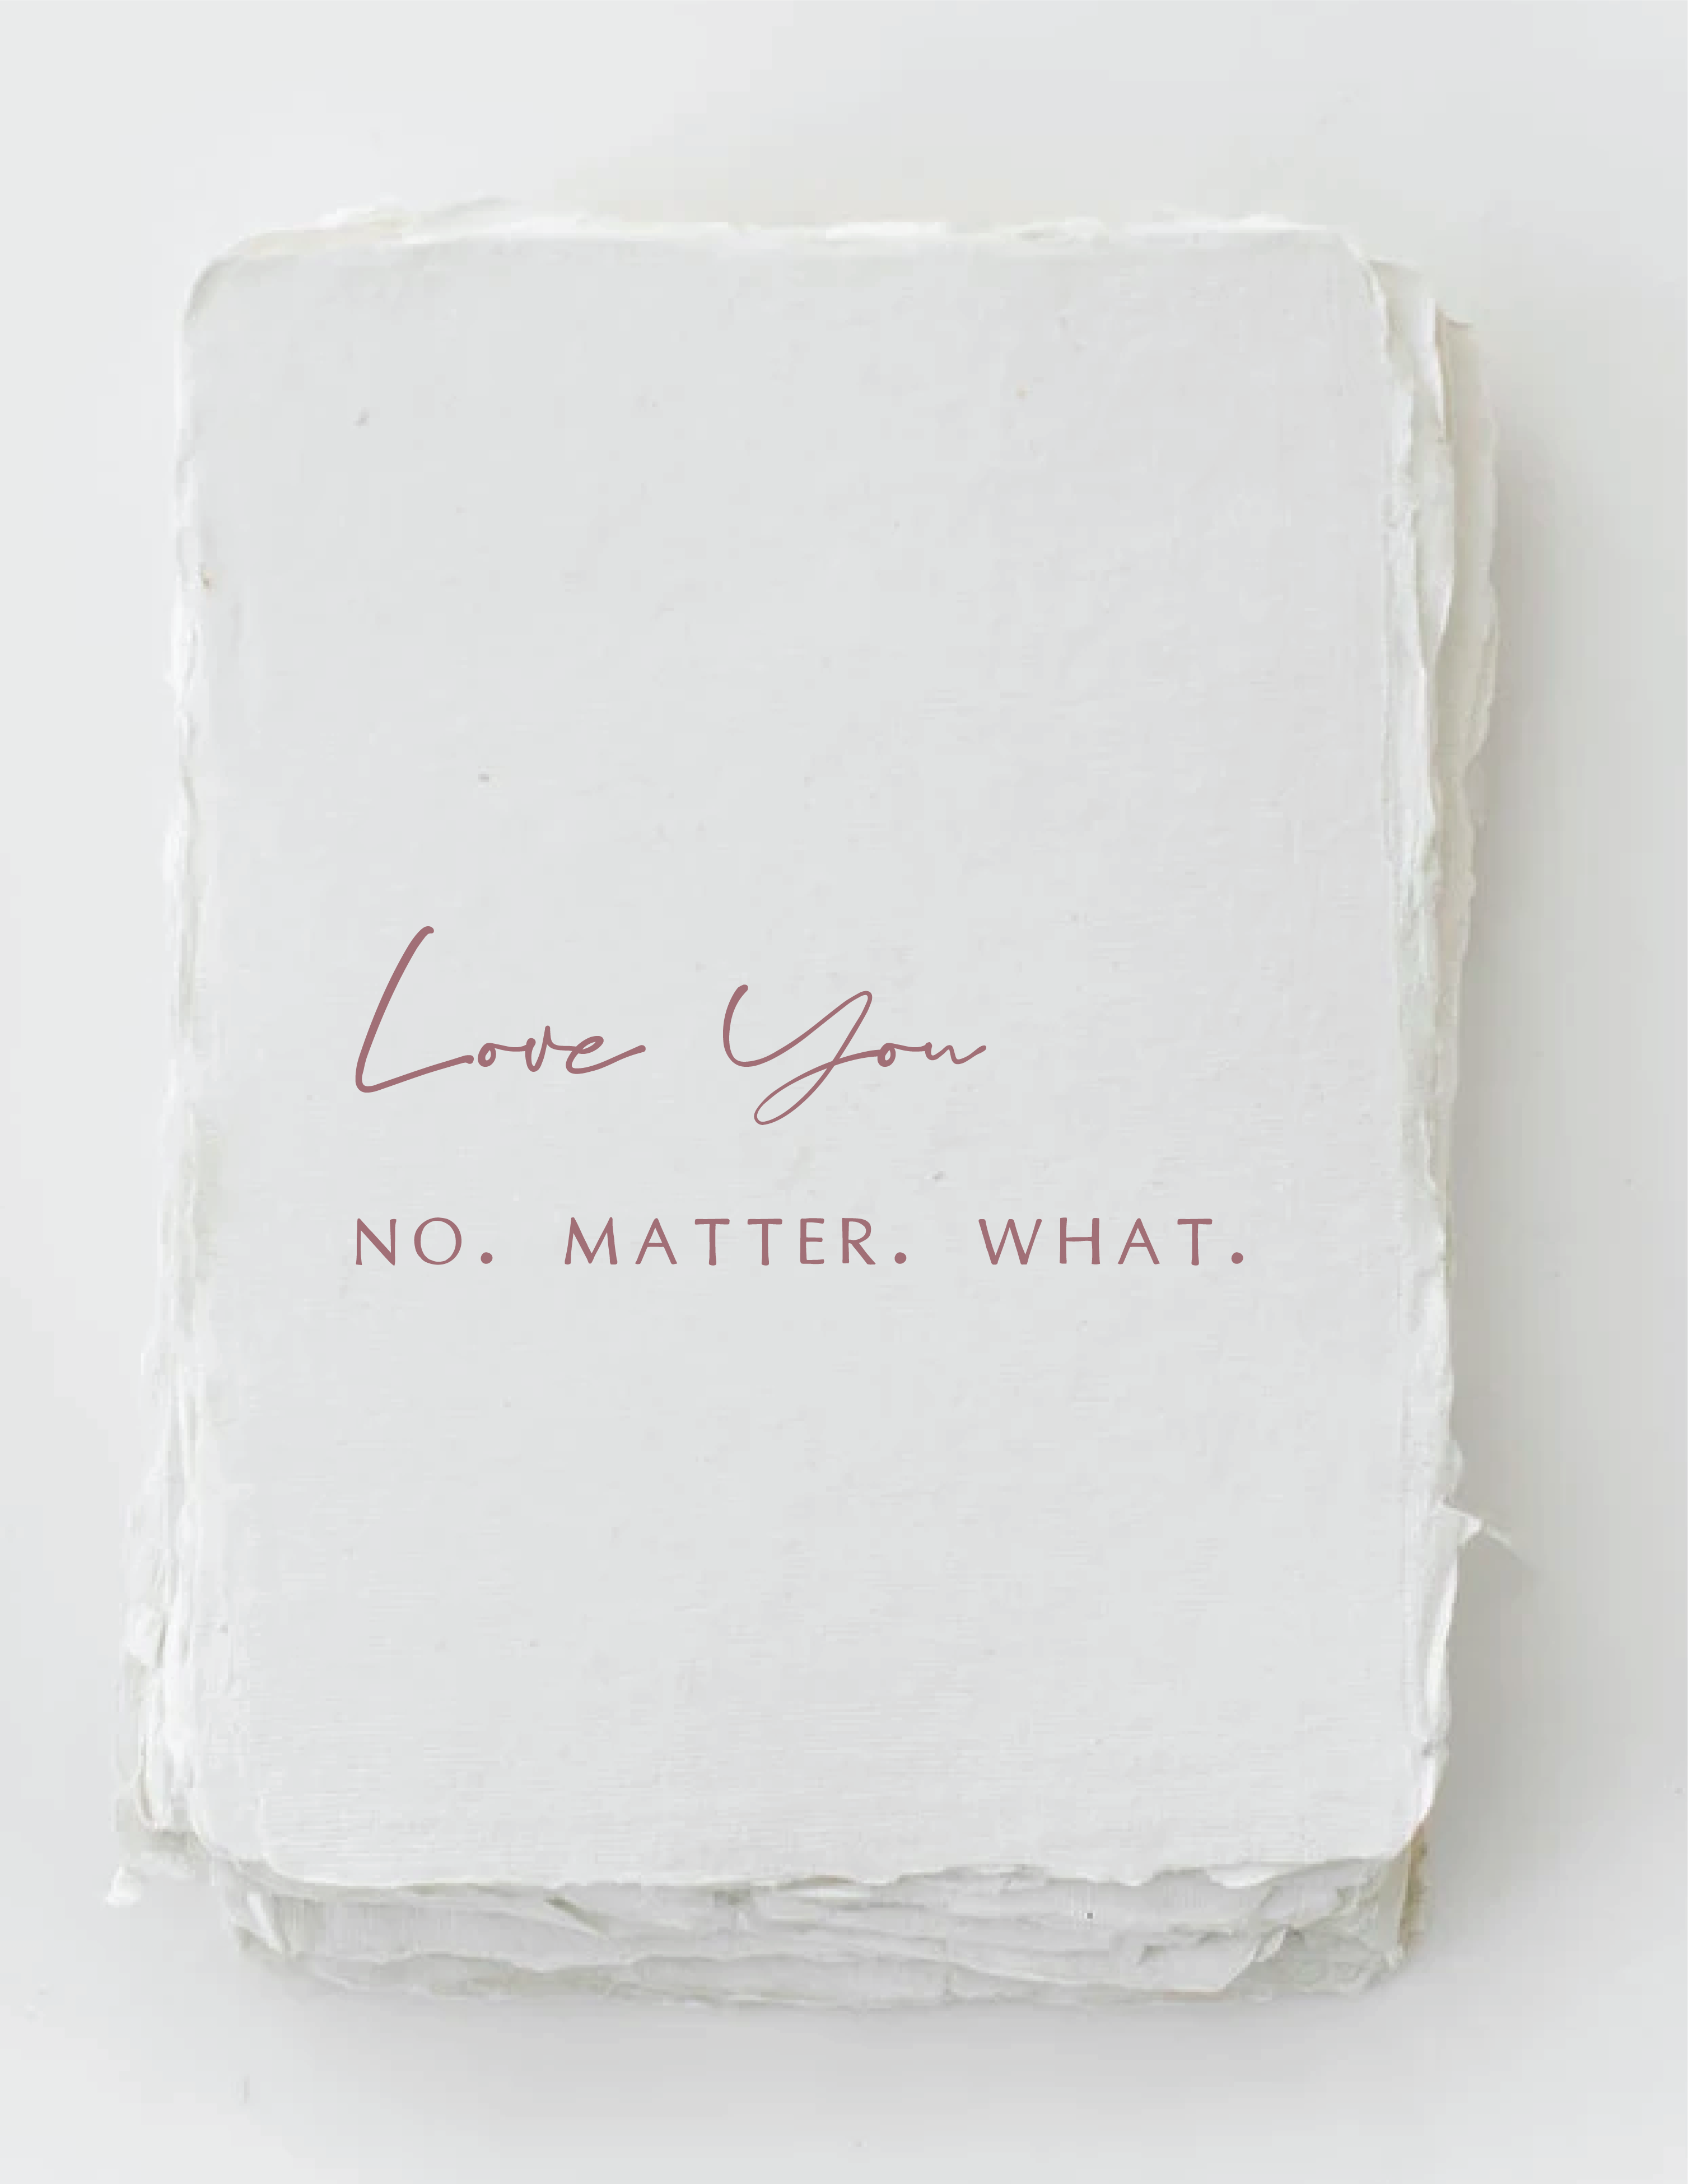 "Love you. No. Matter. What." Love Friend Greeting Card